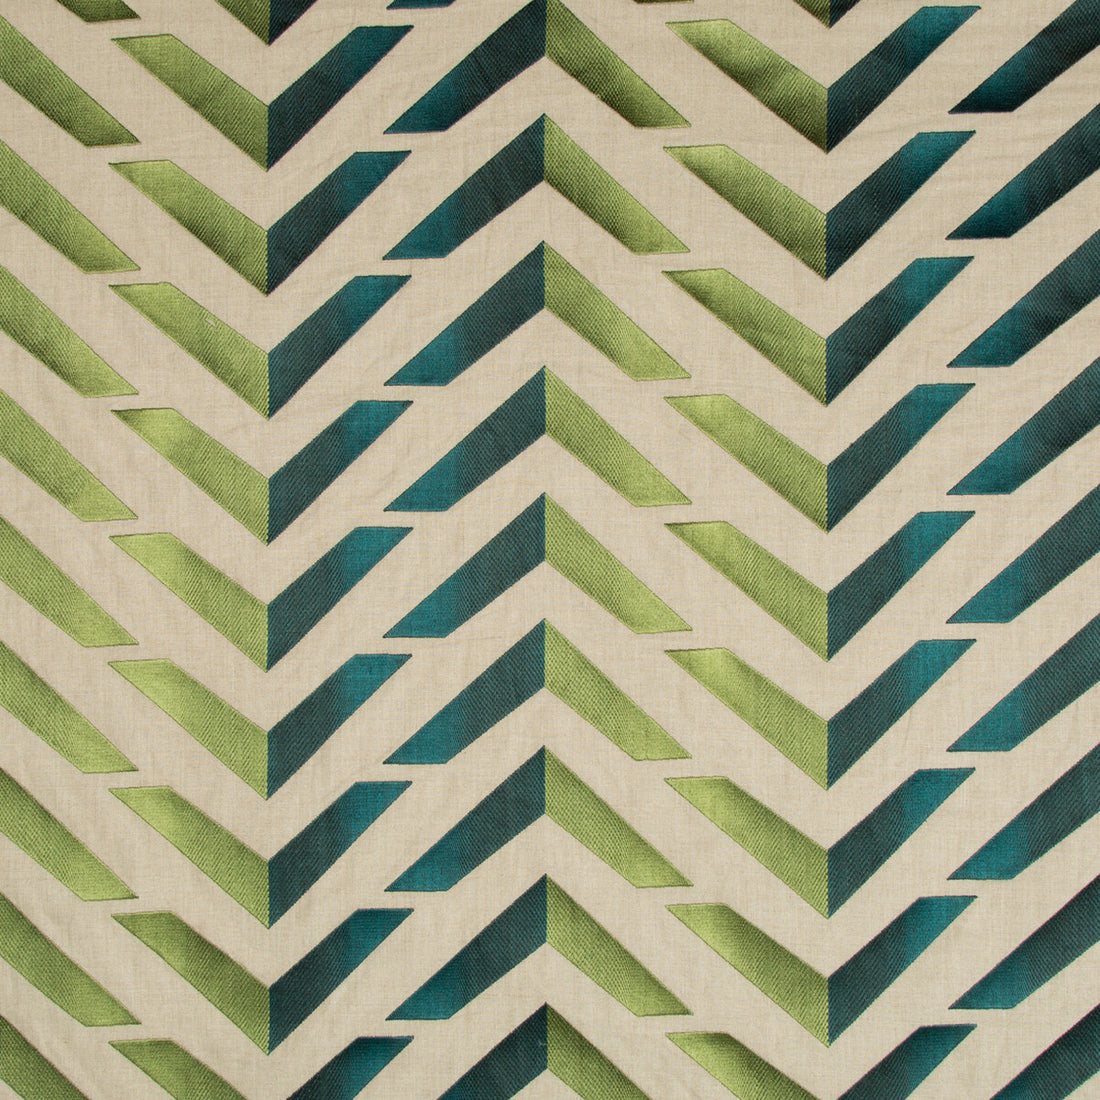 Les Vagues Emb fabric in green/teal color - pattern 8017128.335.0 - by Brunschwig &amp; Fils in the Les Ensembliers collection